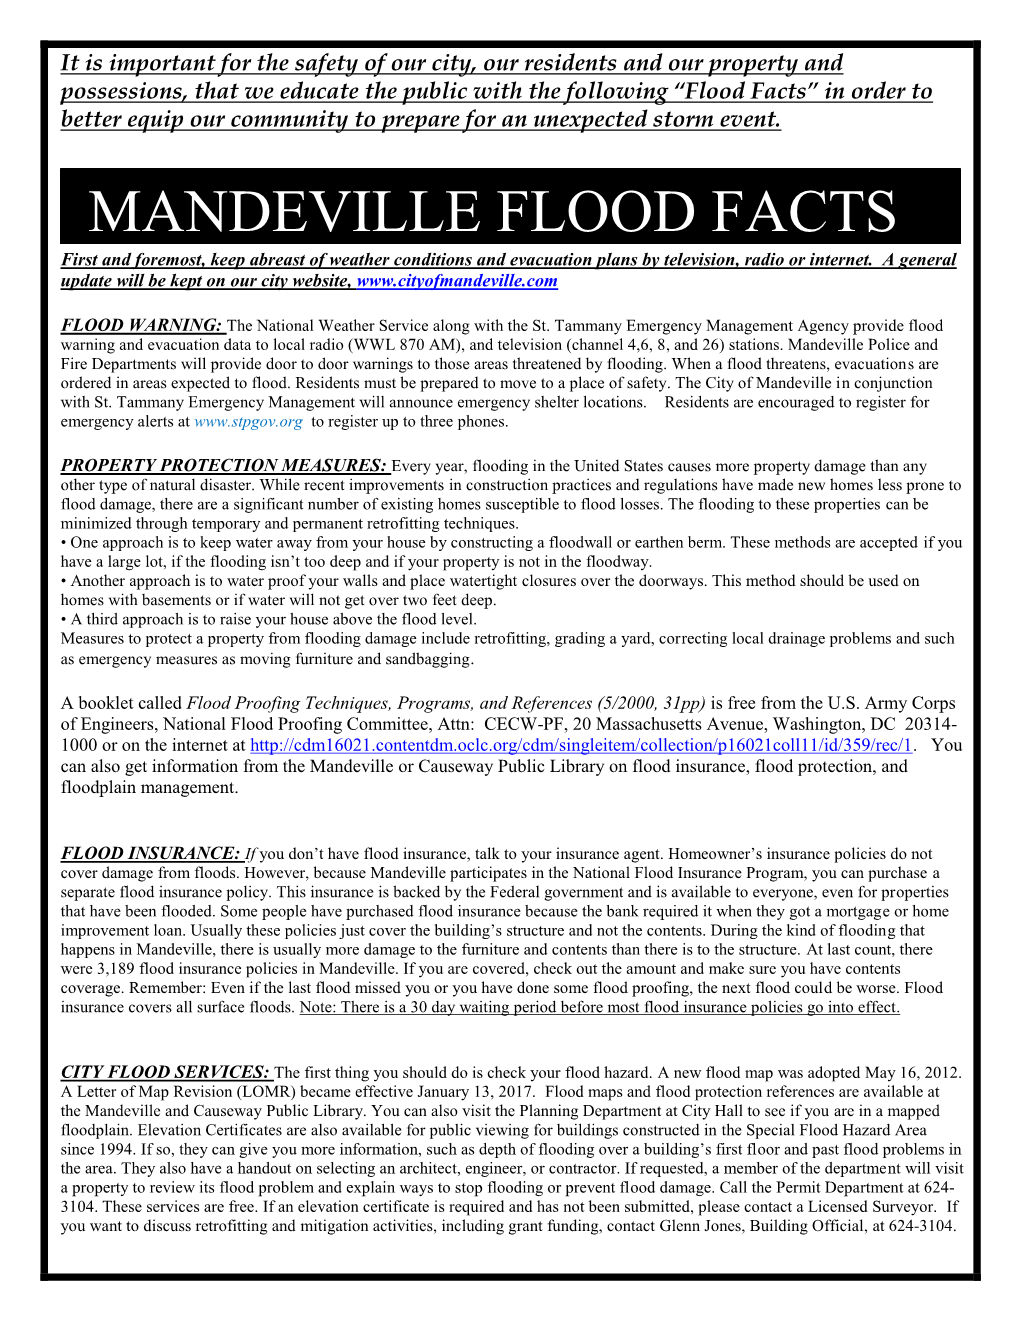 MANDEVILLE FLOOD FACTS First and Foremost, Keep Abreast of Weather Conditions and Evacuation Plans by Television, Radio Or Internet